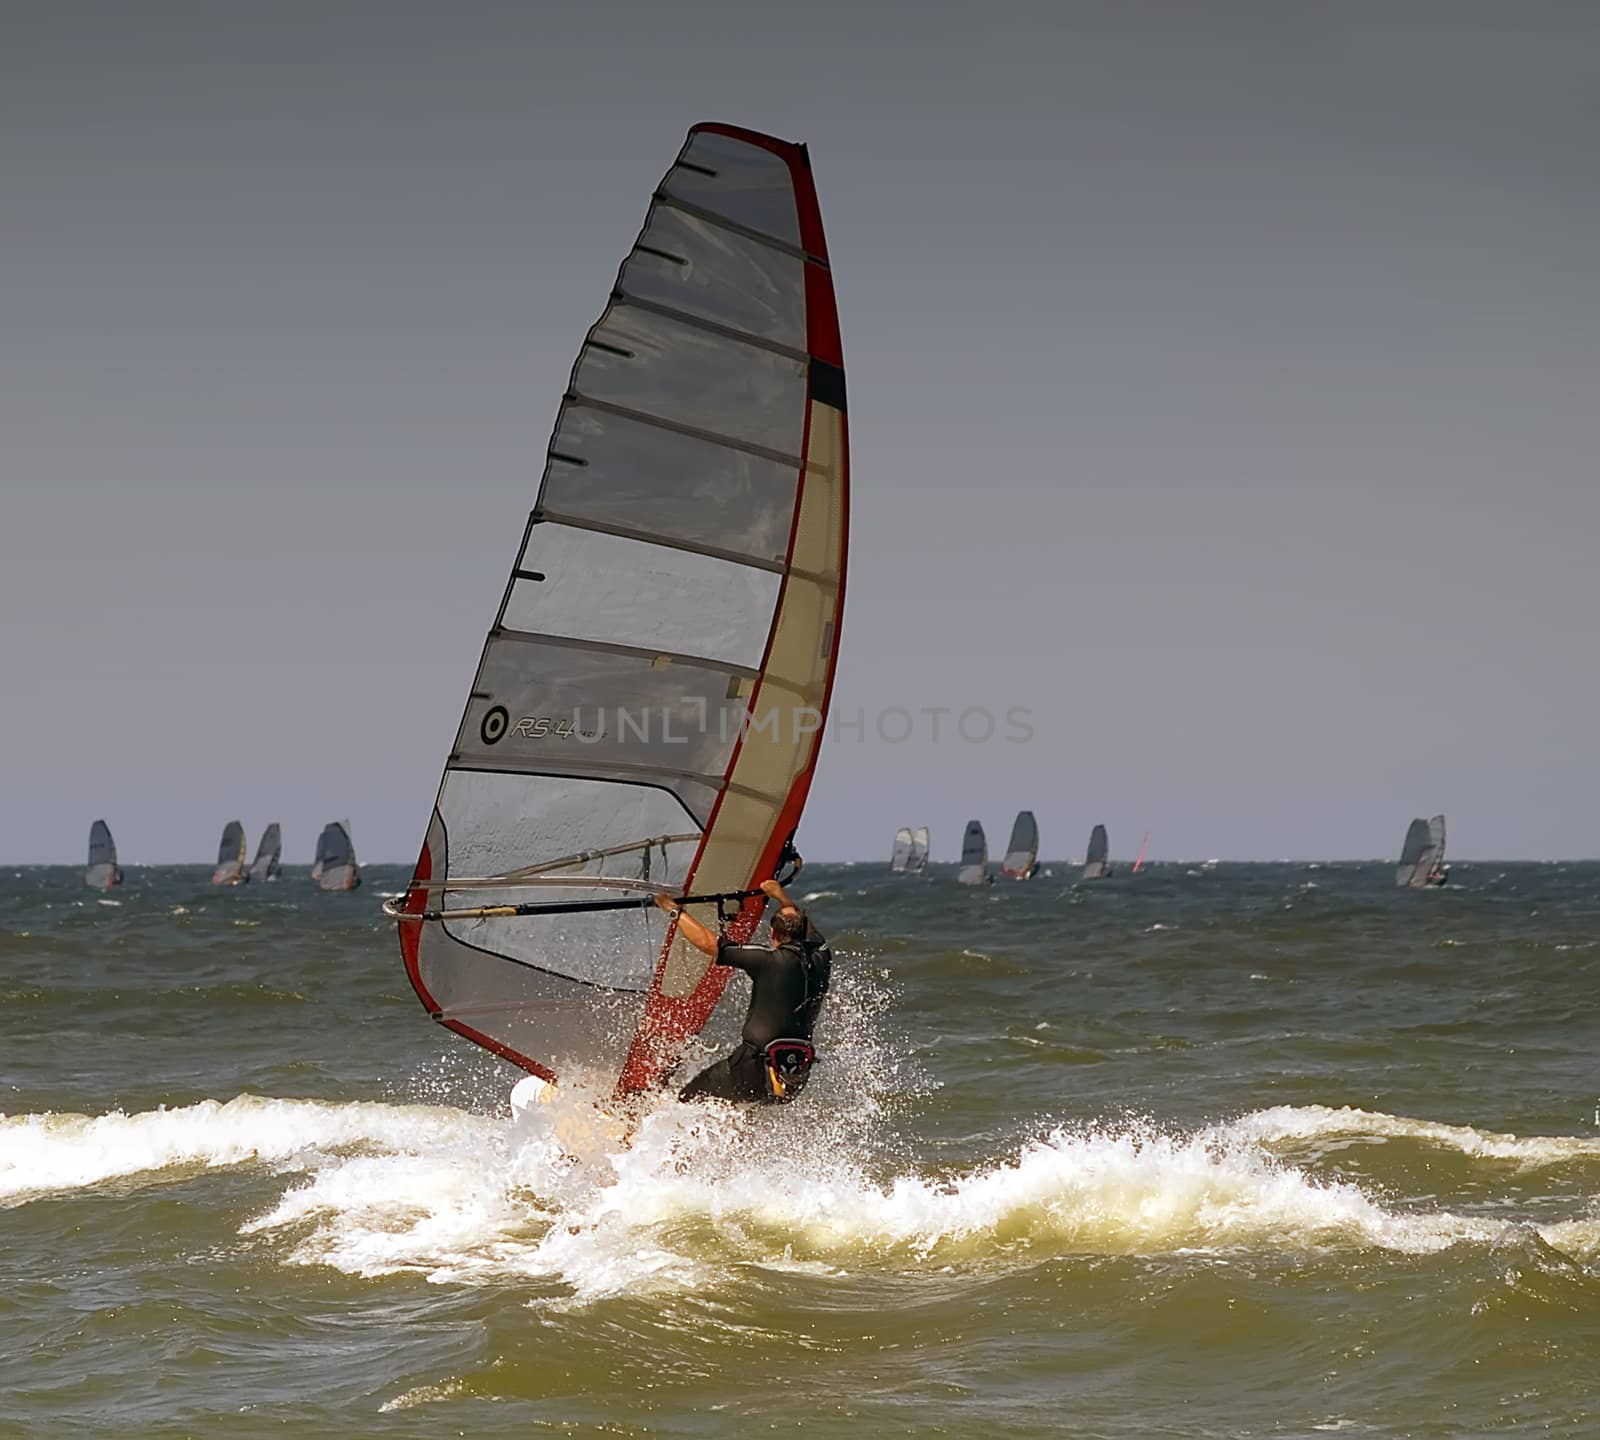 the windsurfing man strart going to sea 